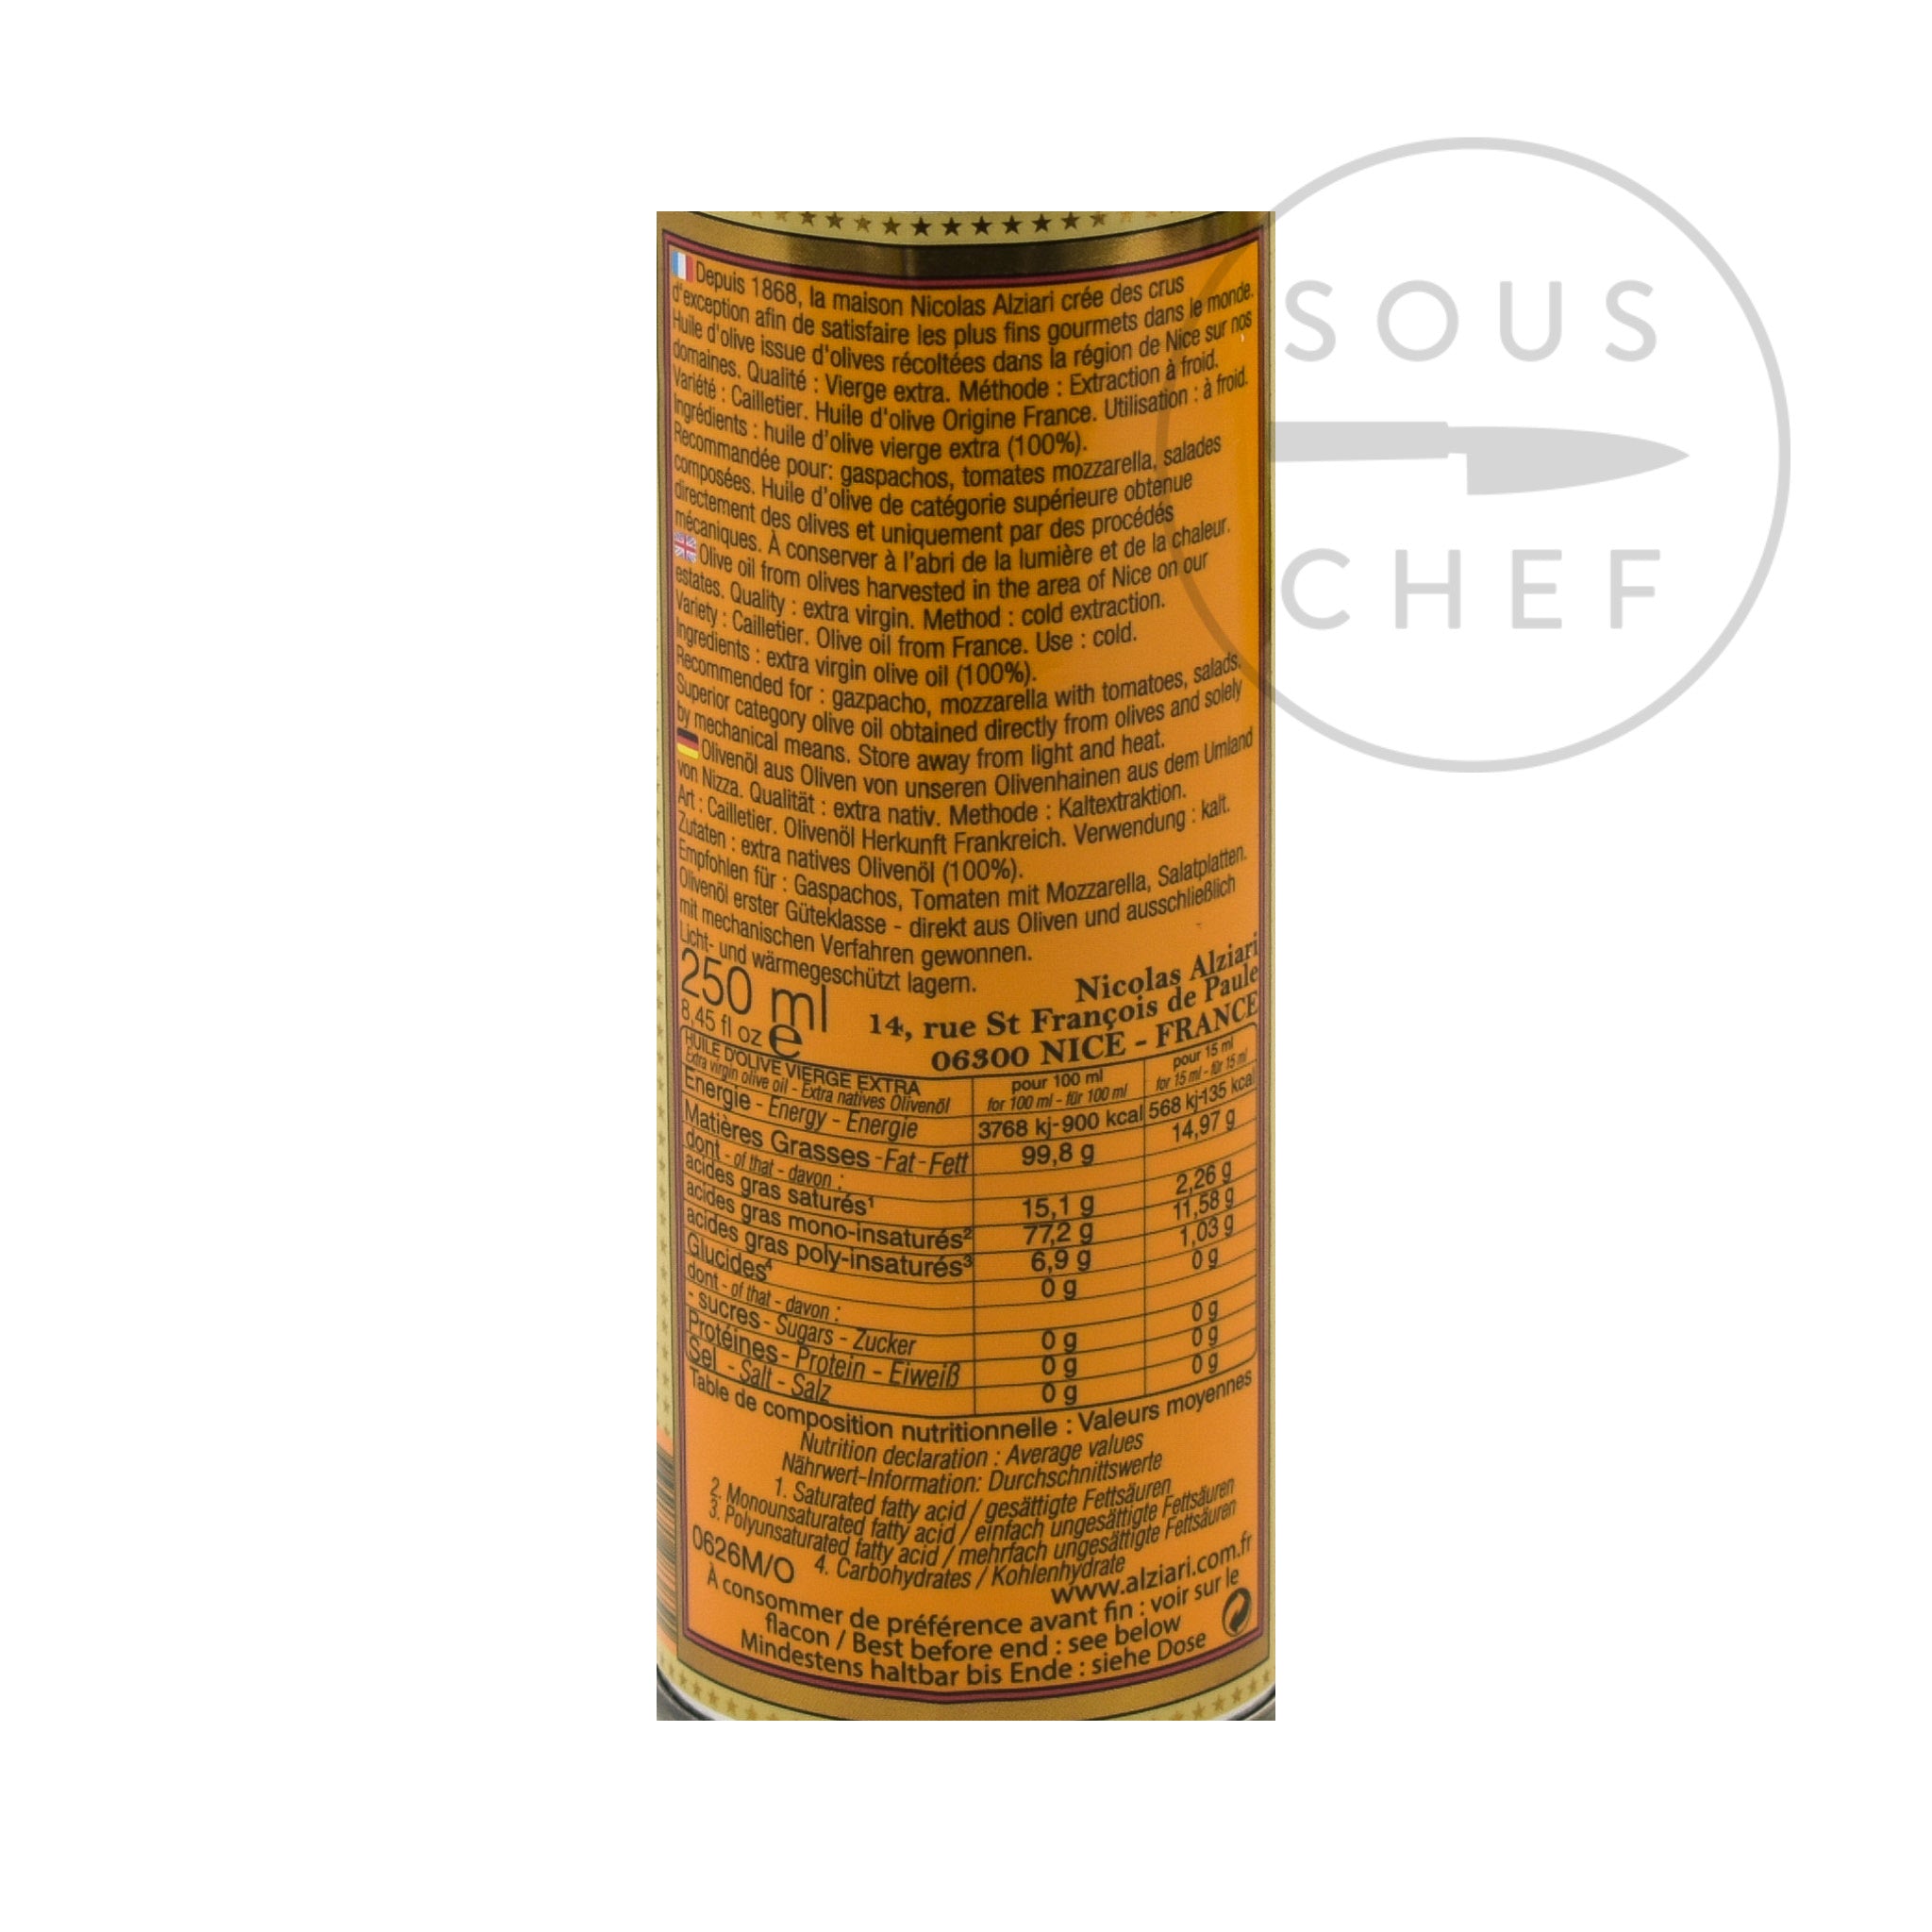 Nicolas Alziari DOP 'Cuvee Cesar' Olive Oil from Provence 250ml Ingredients Nutritional Information